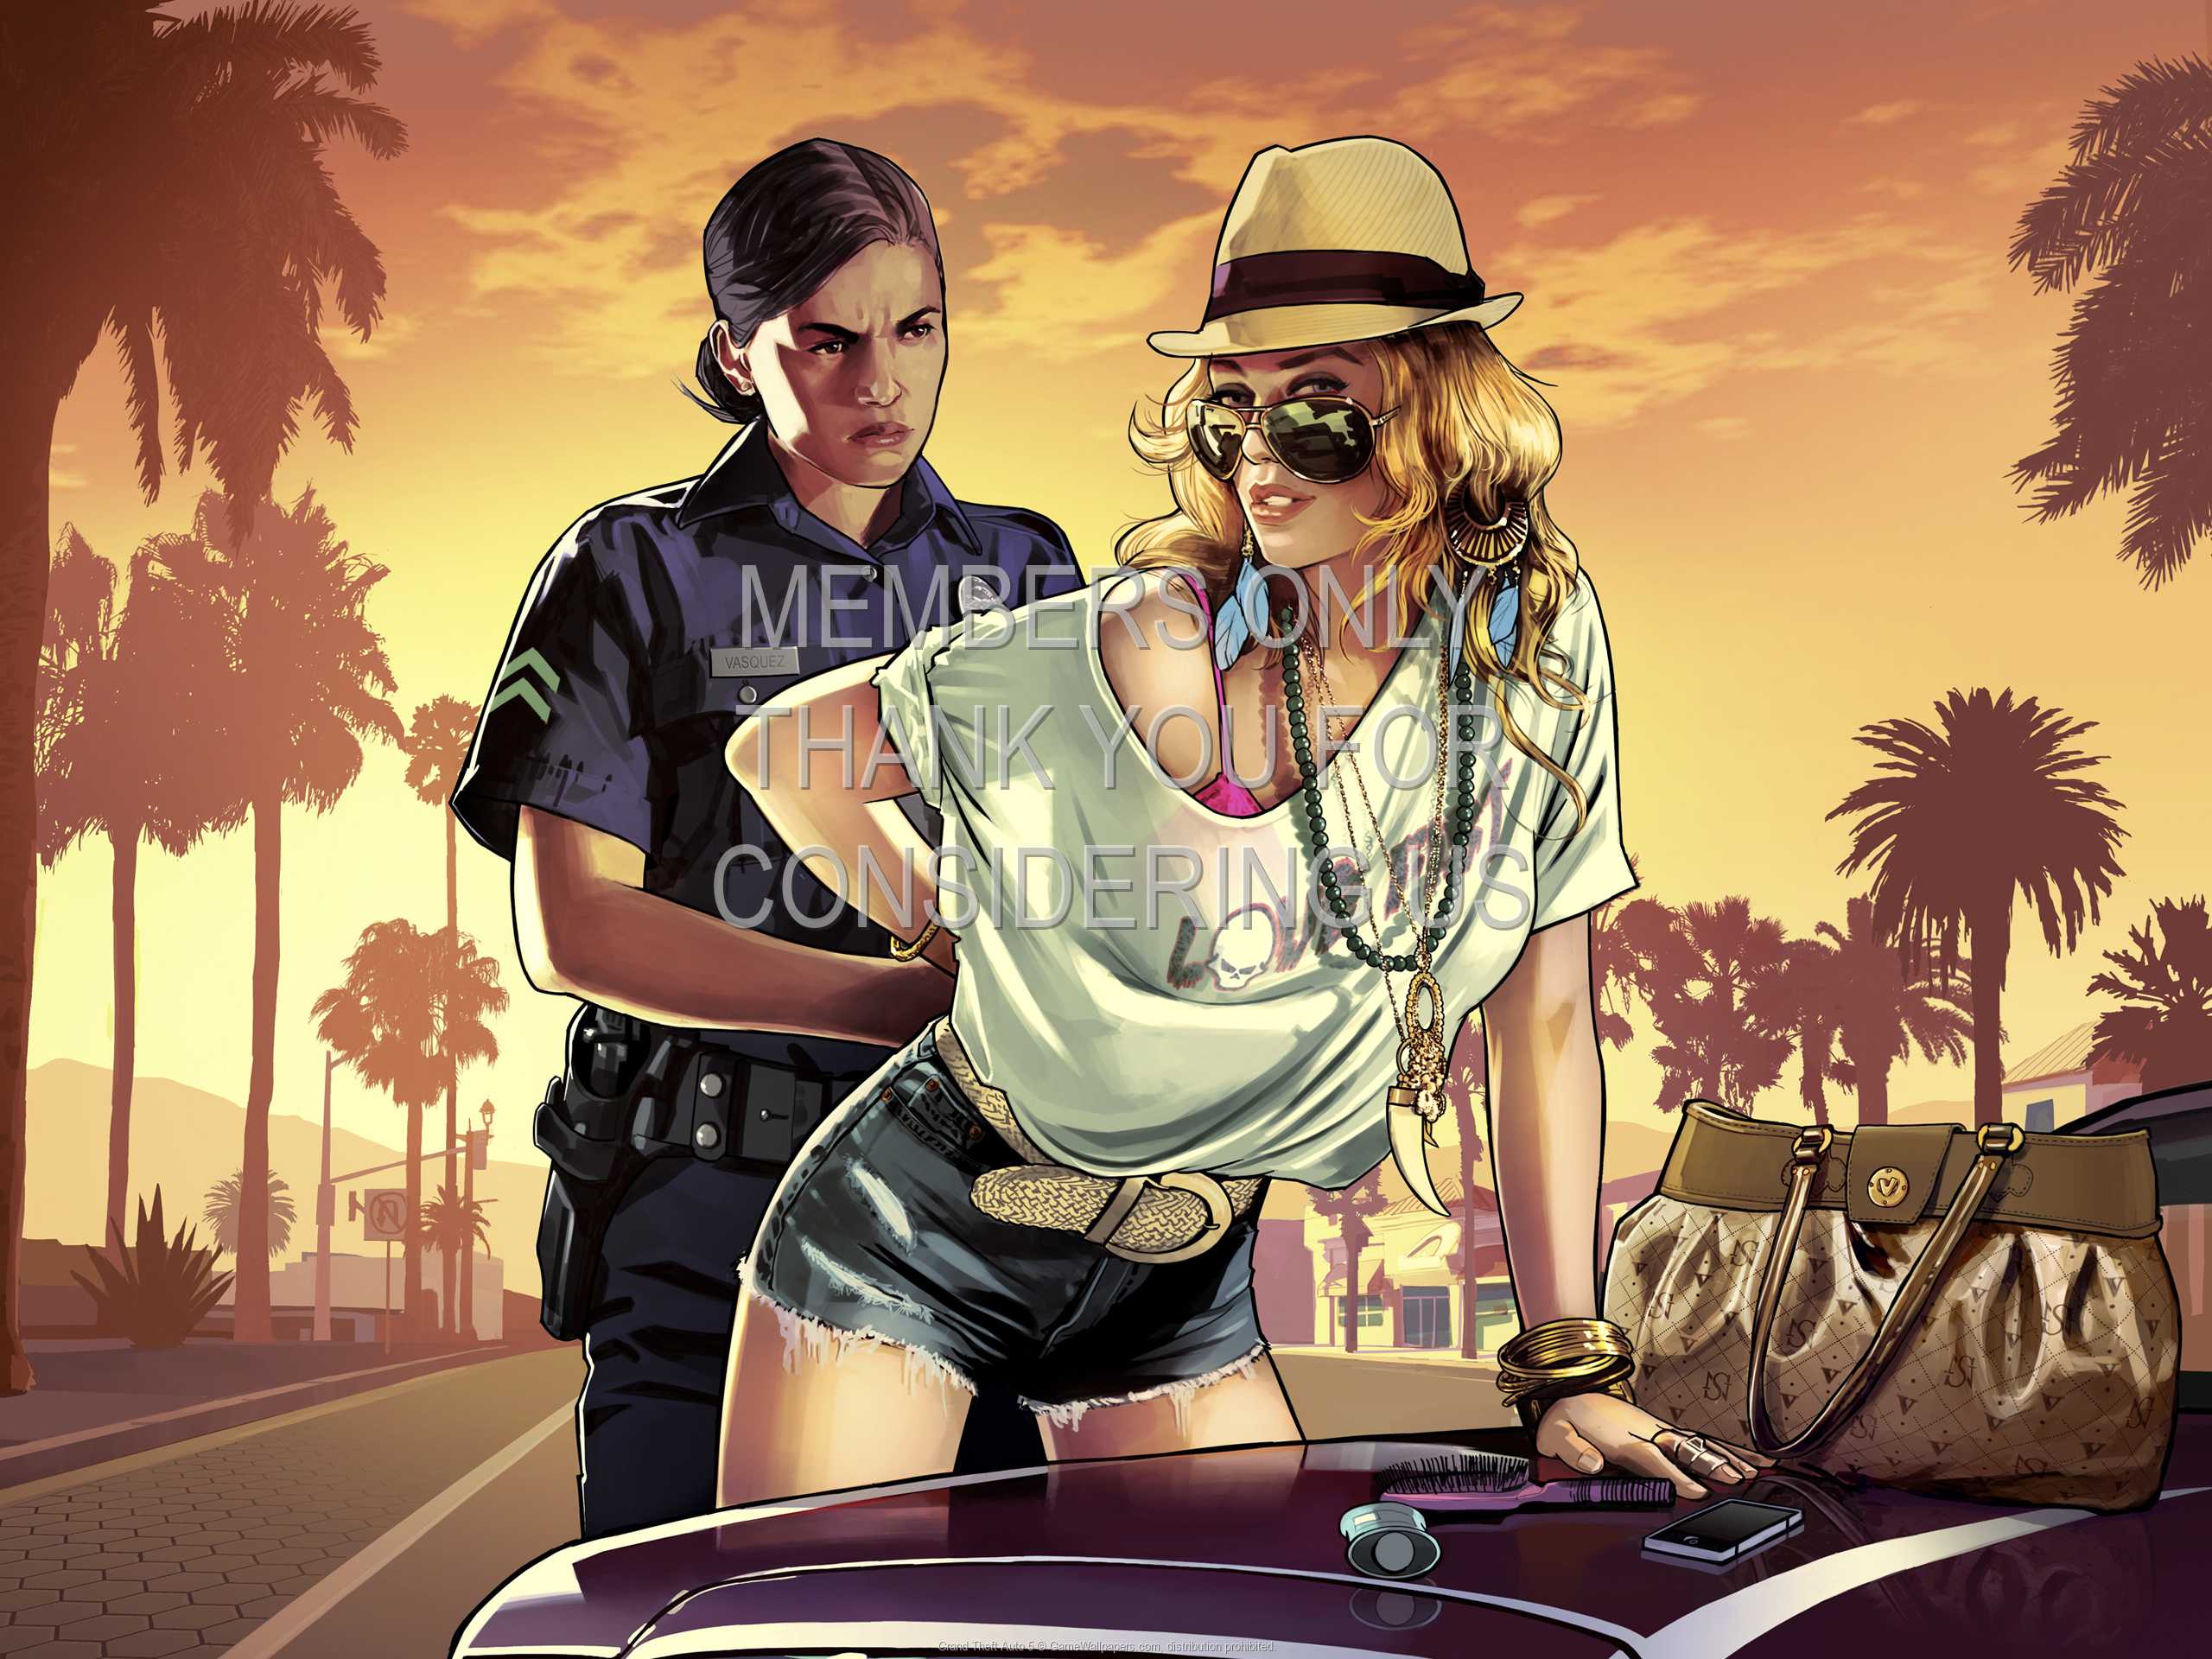 Grand Theft Auto 5 1080p%20Horizontal Mobile wallpaper or background 02